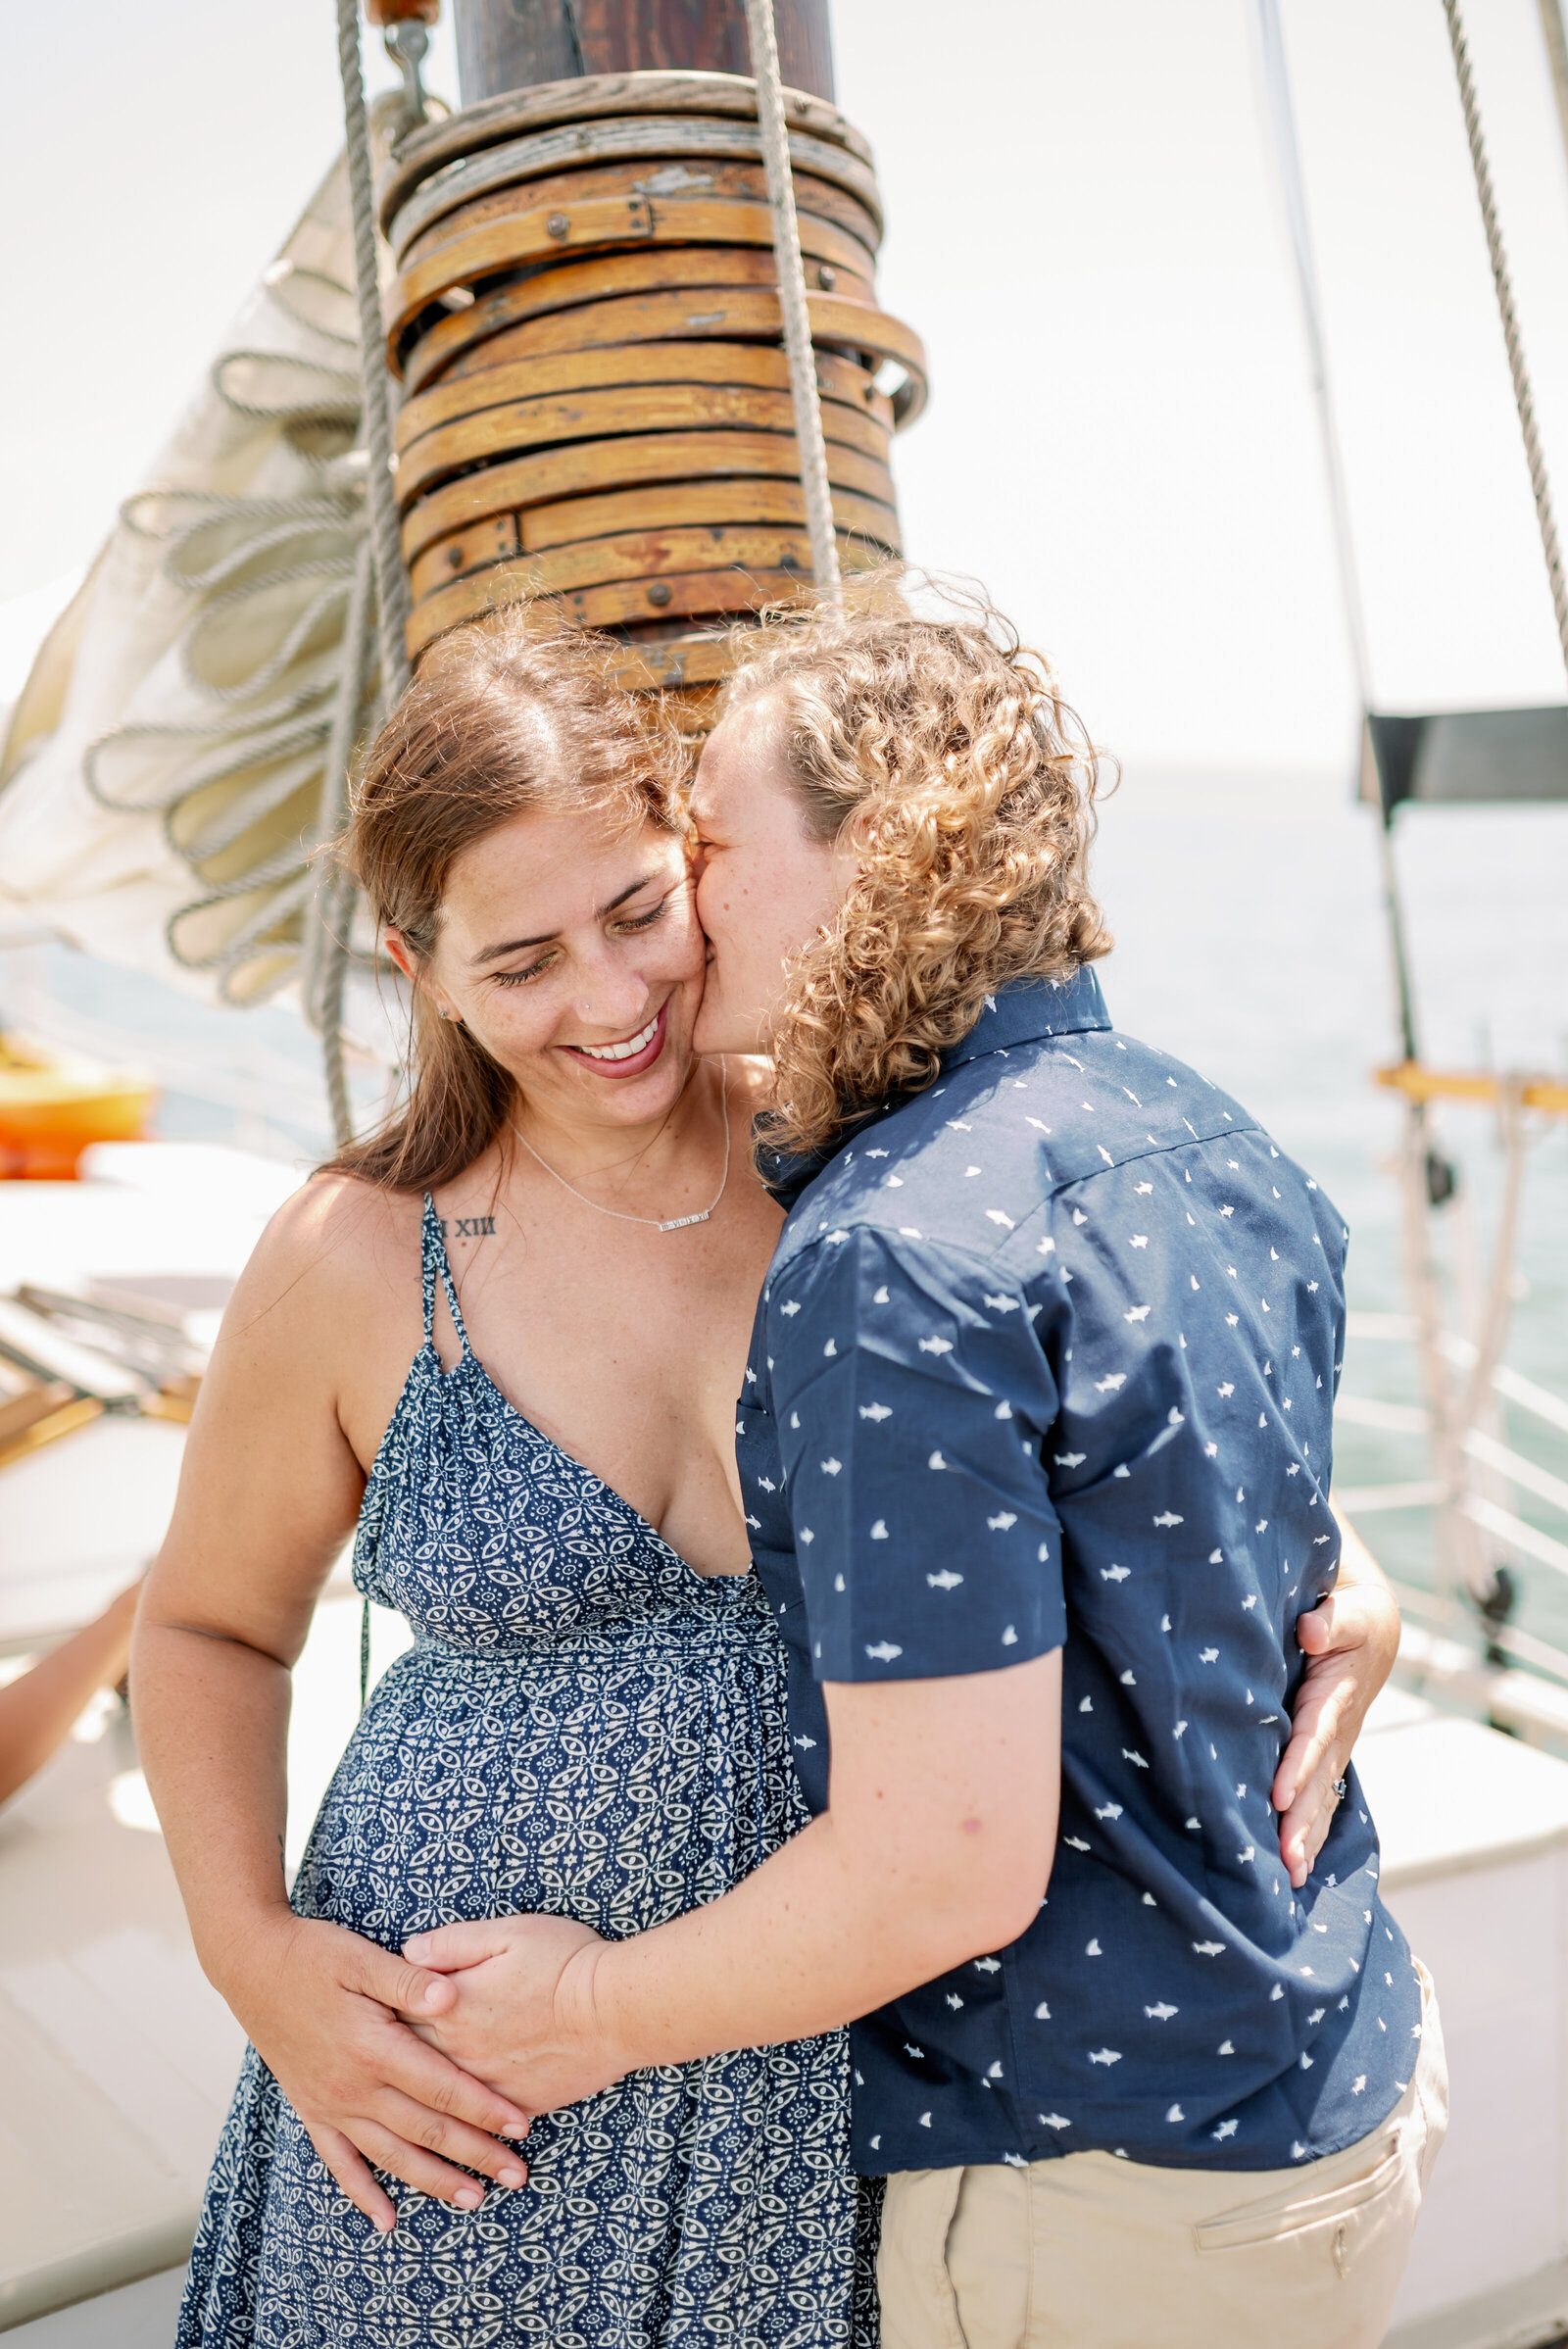 engaged couple sharing a quick kiss on the cheek on the sailboat in Key West, FL